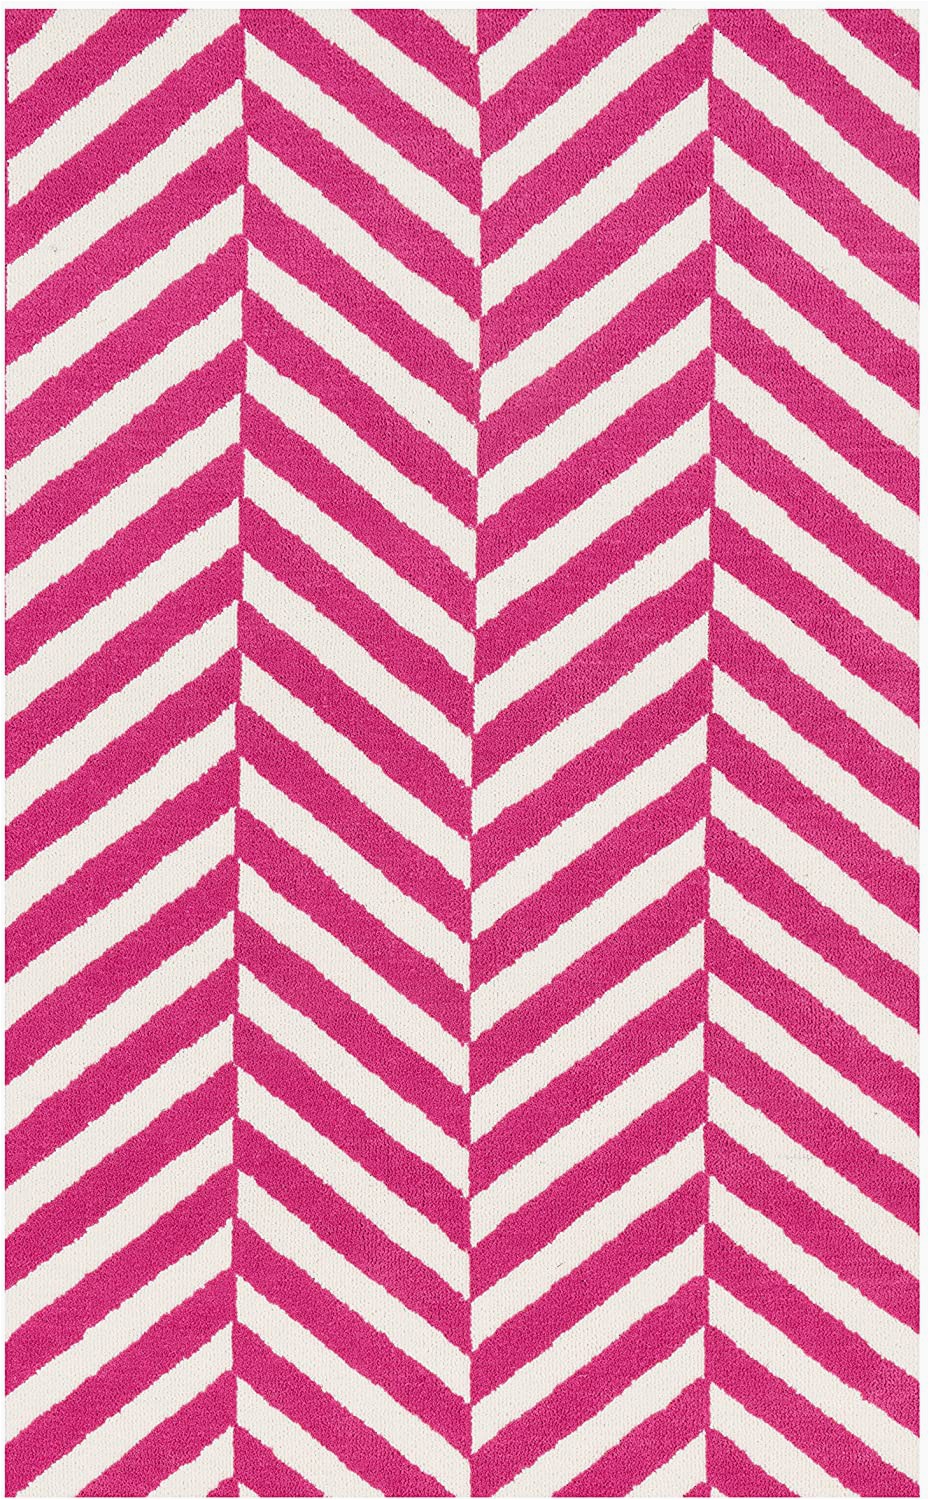 Piper Faux Fur area Rug Loloi Piper area Rug 5 Feet by 7 Feet Bubble Gum Pink